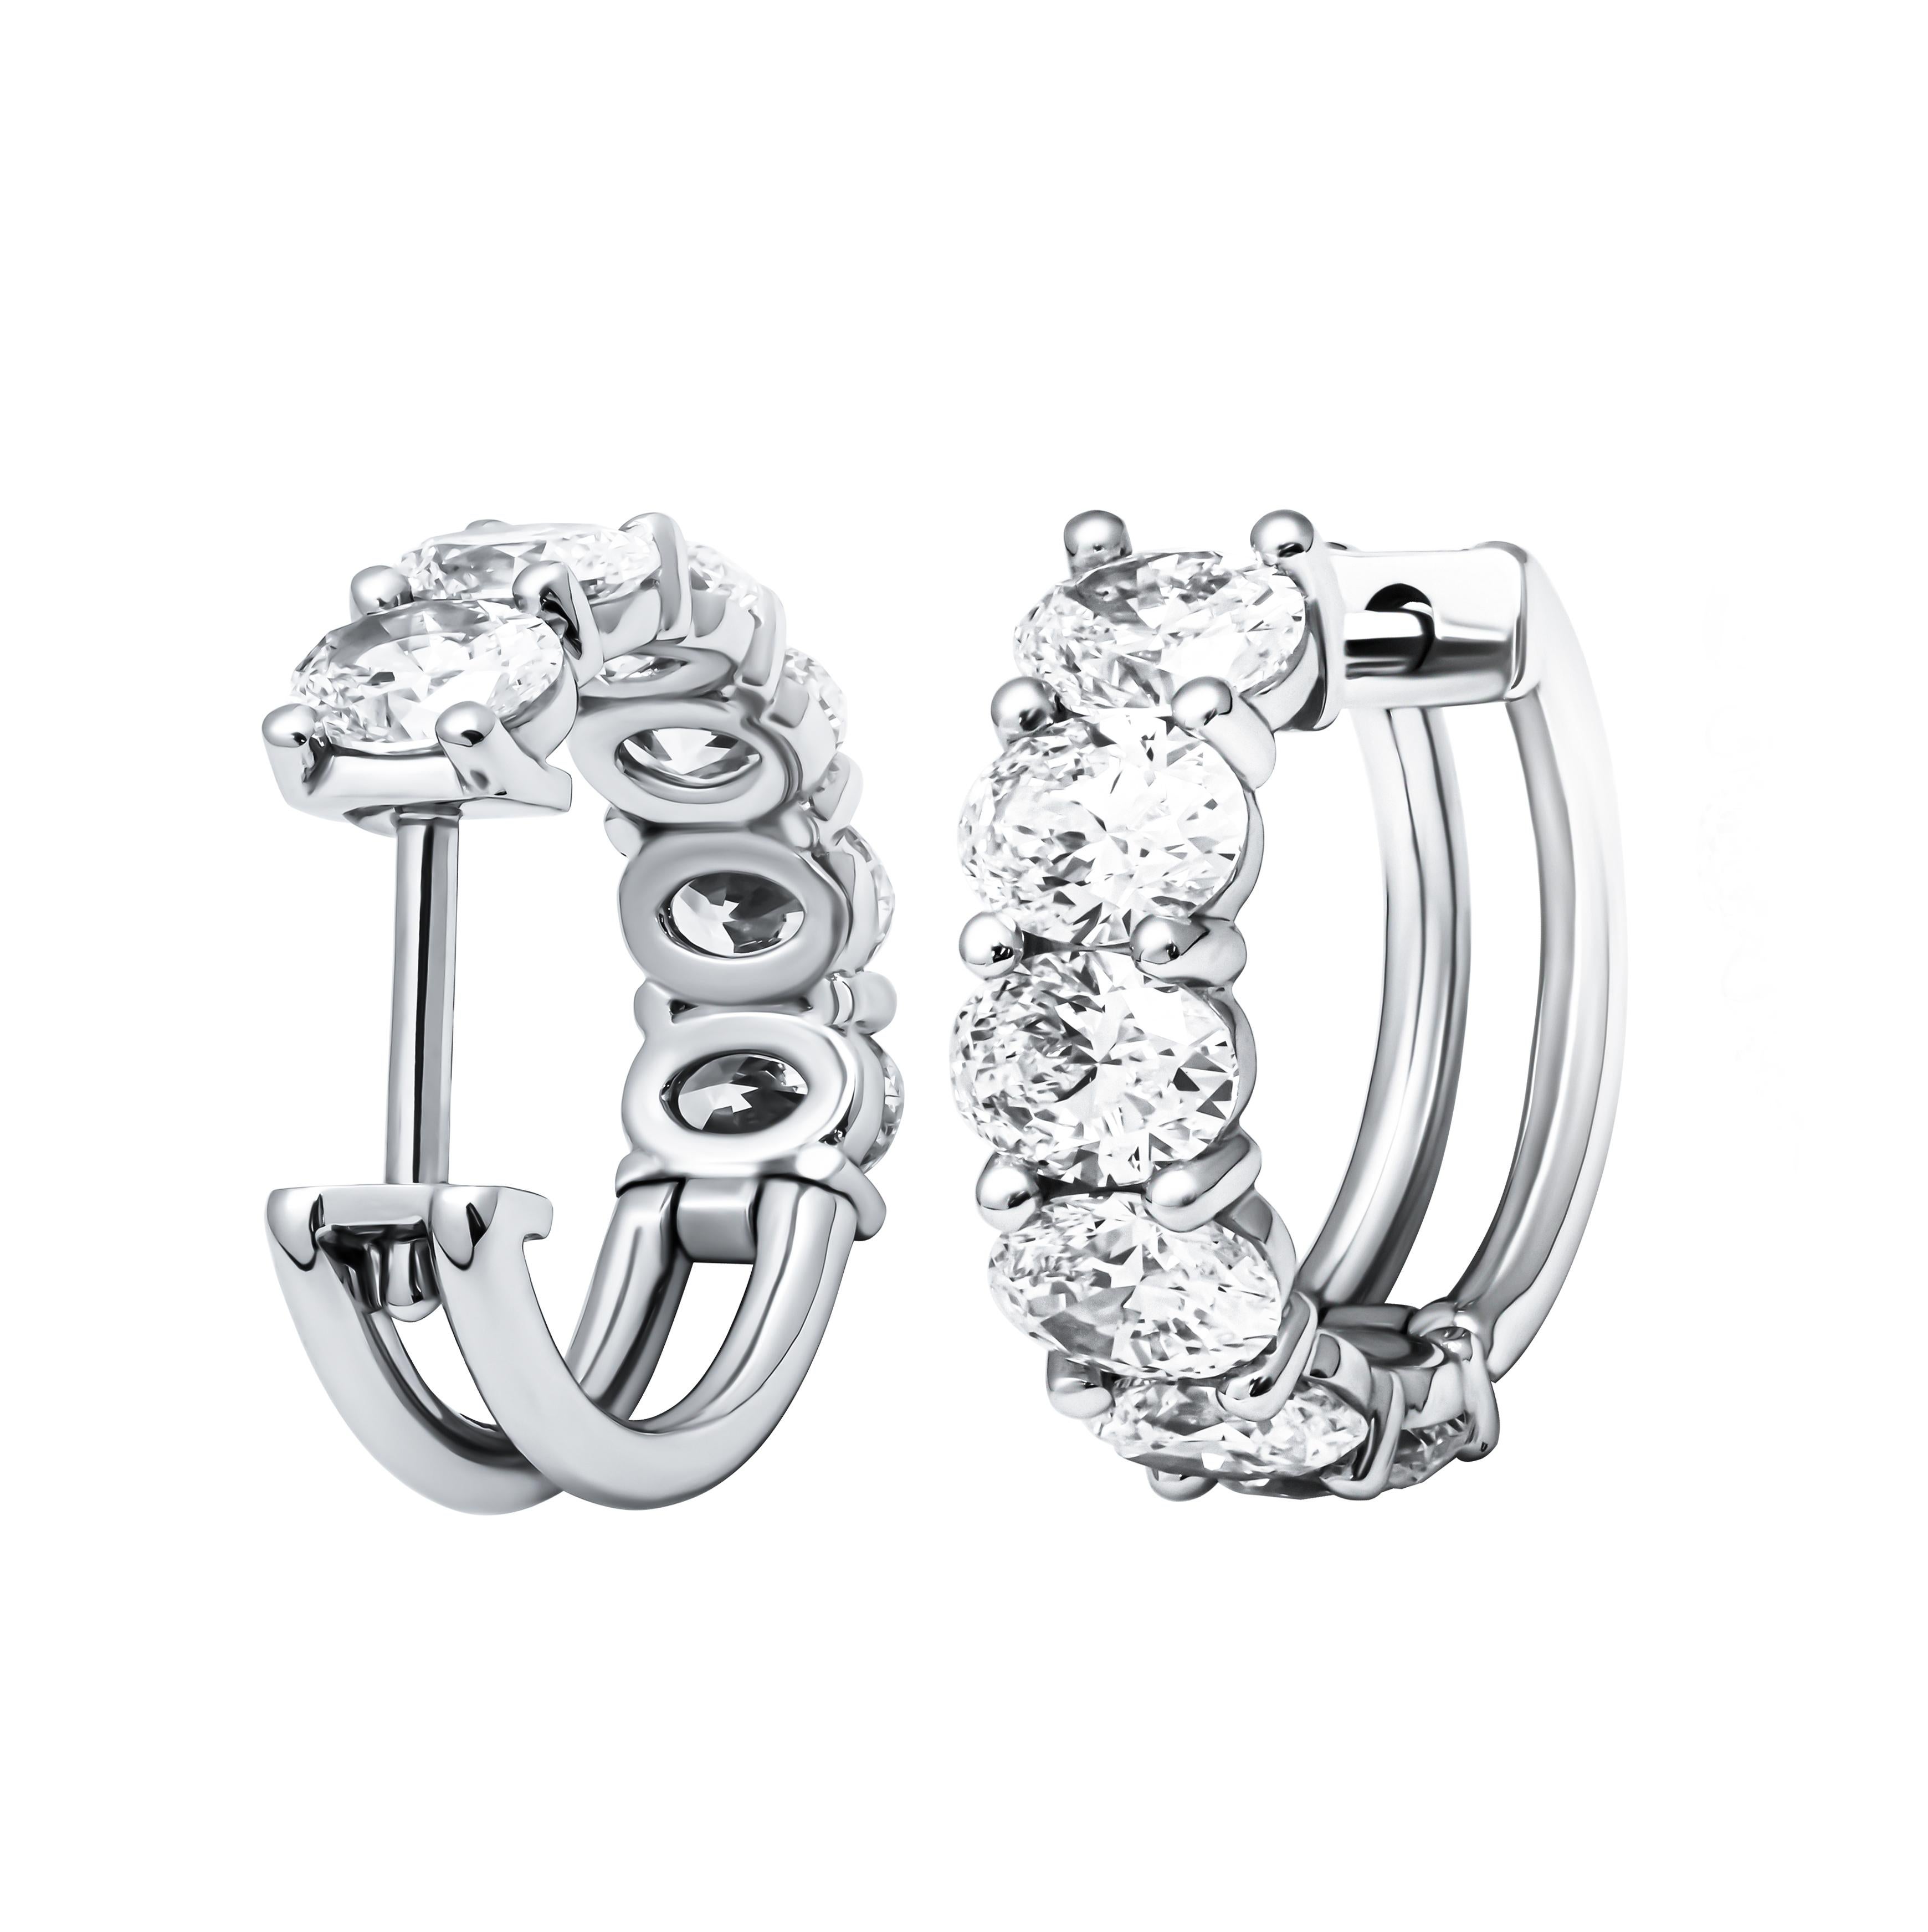 These Oval Diamond Hoop Earrings exude timeless elegance and luxury. Crafted from lustrous platinum, they boast a design that seamlessly blends classic sophistication with contemporary style. Each hoop is adorned with twelve dazzling oval-cut